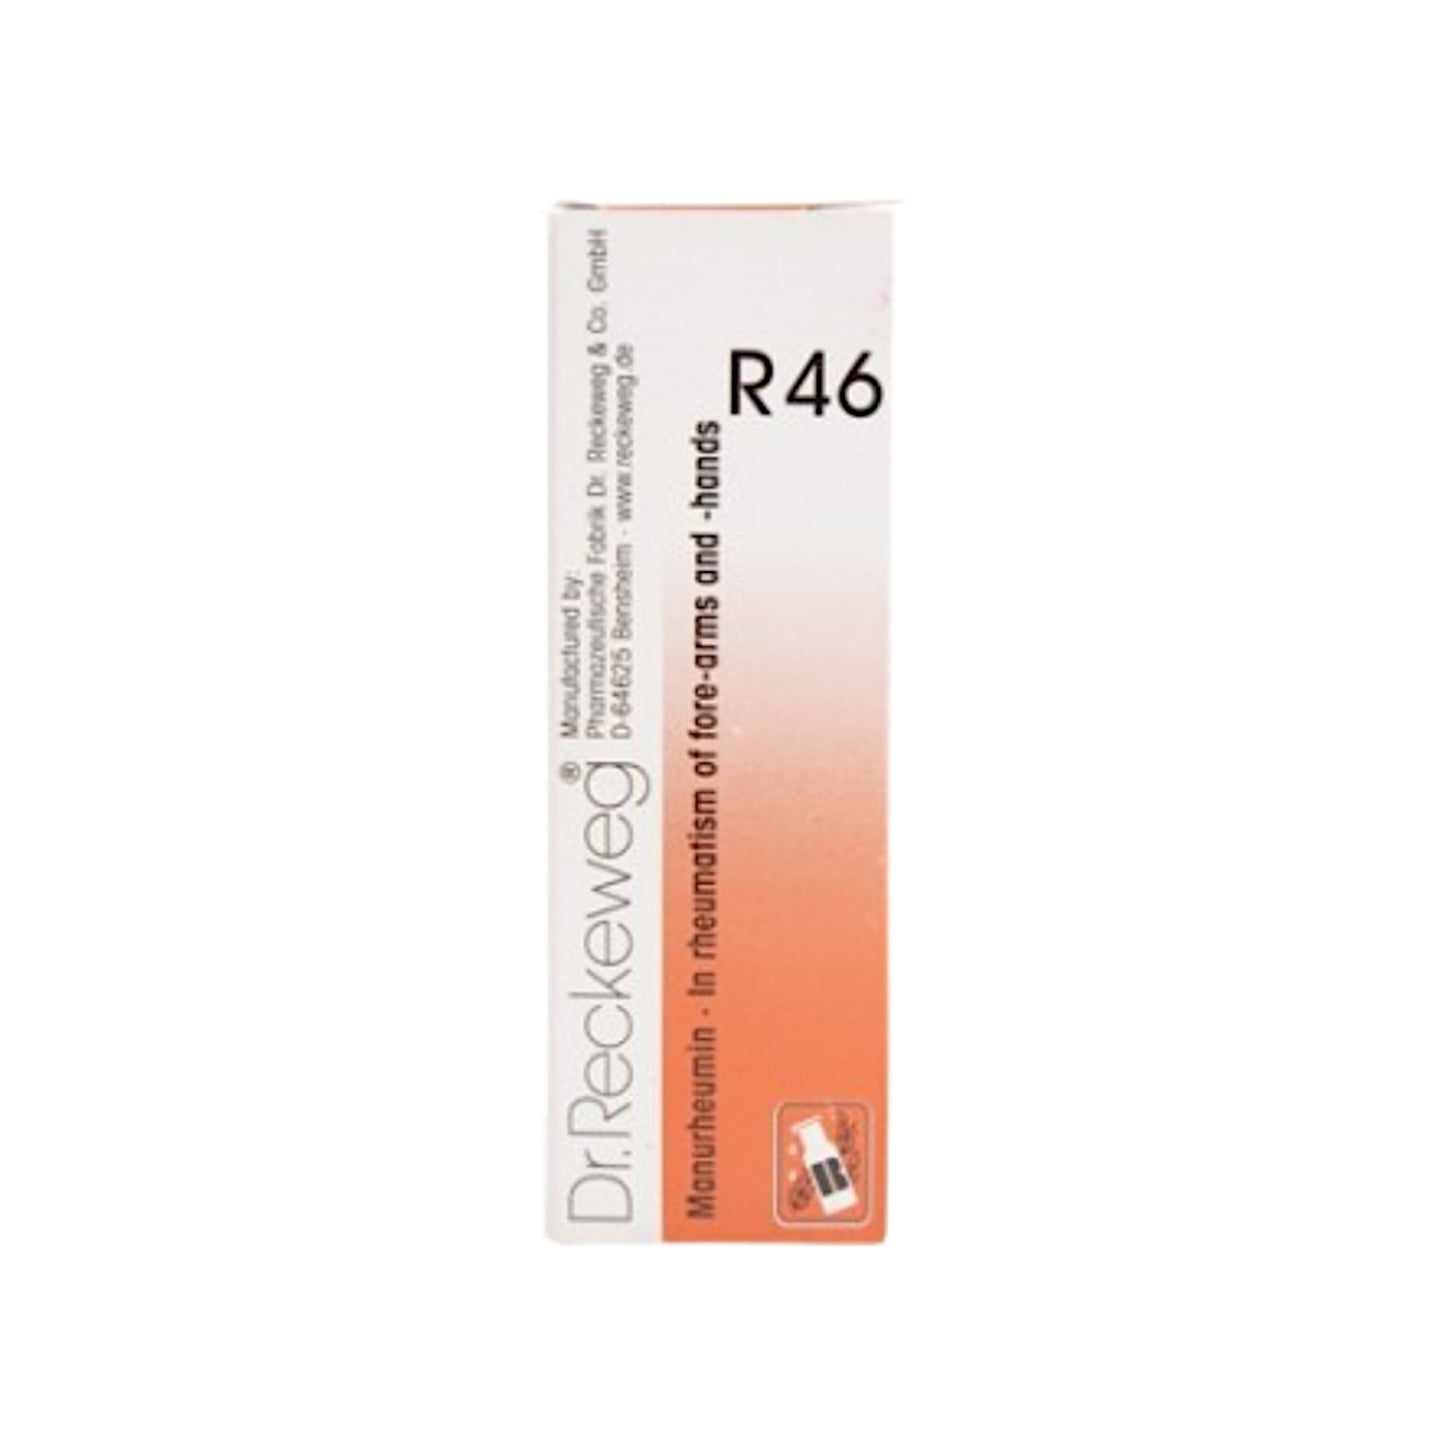 Image for DR. RECKEWEG R46 - Rheumatism Drops 22 ml: For rheumatic conditions, arthritis, muscle and joint pain.